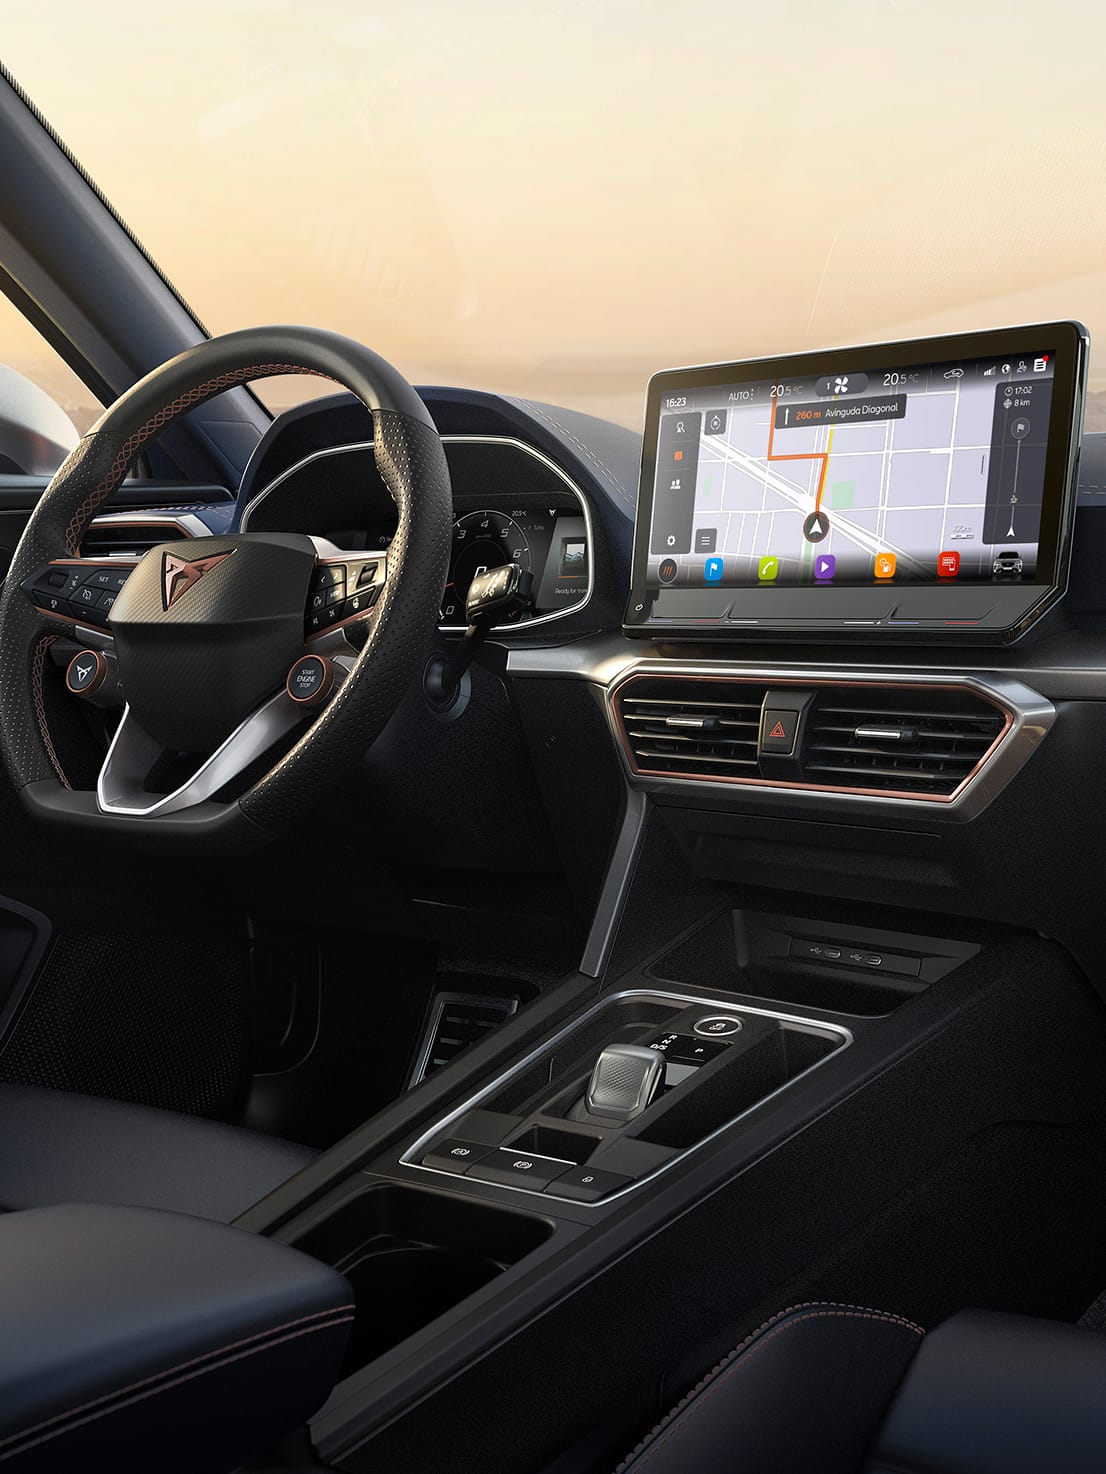 cupra connect voice control infotainment system with real-time traffic updates and alternative route suggestions